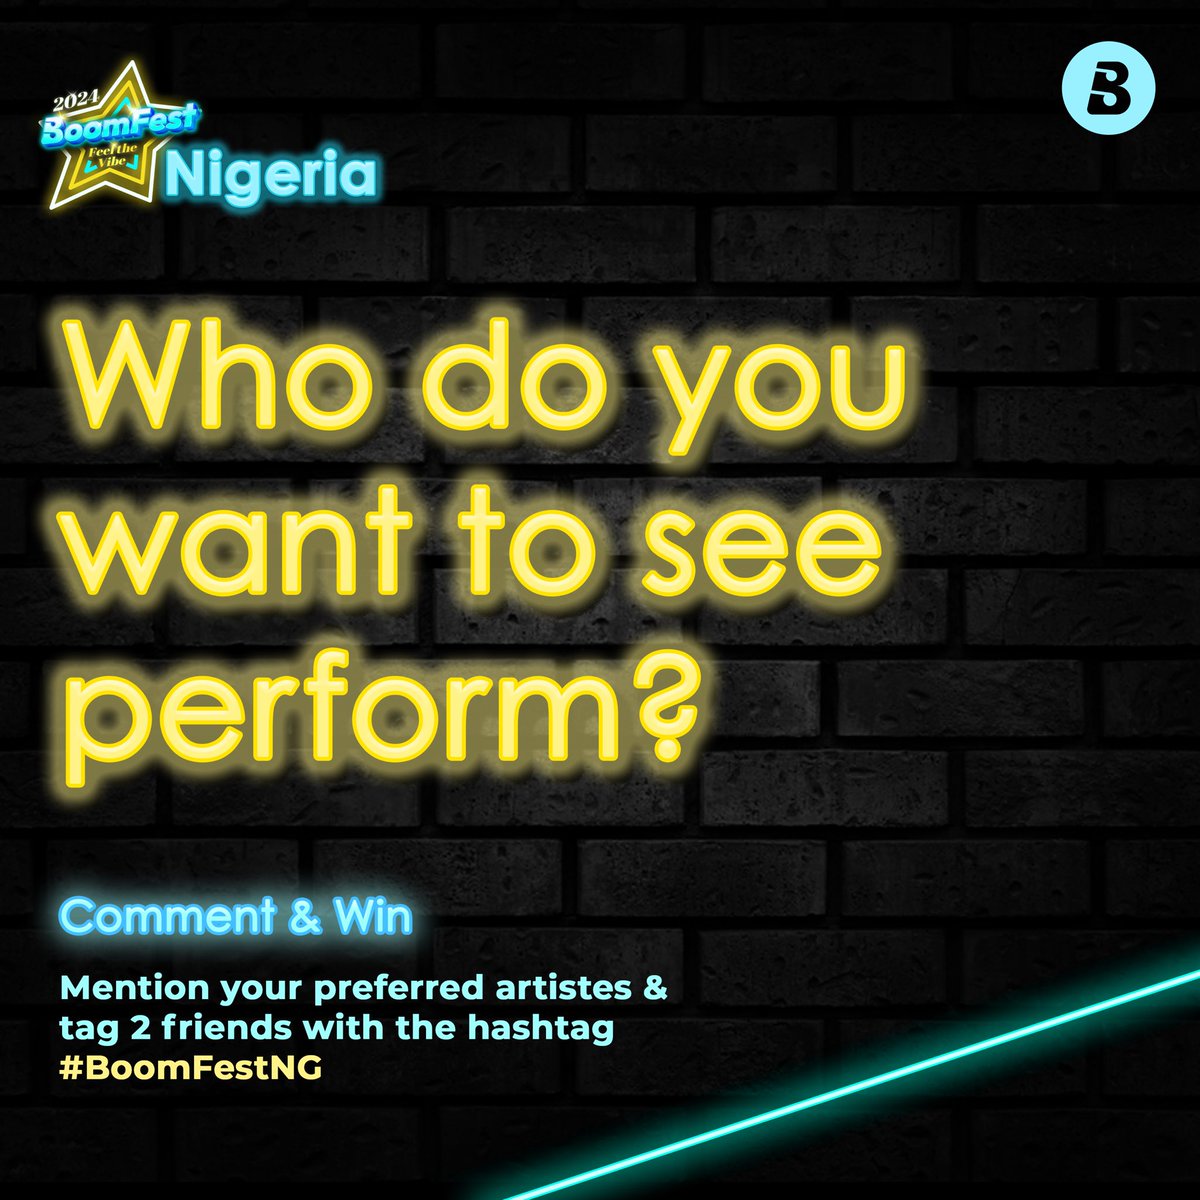 How to? 
- Mention the artists you want to see perform in the comment section.
- ⁠Tag 2 friends and use the hashtag #BoomFestNG

3 random winners will be selected. 

#HomeOfMusic